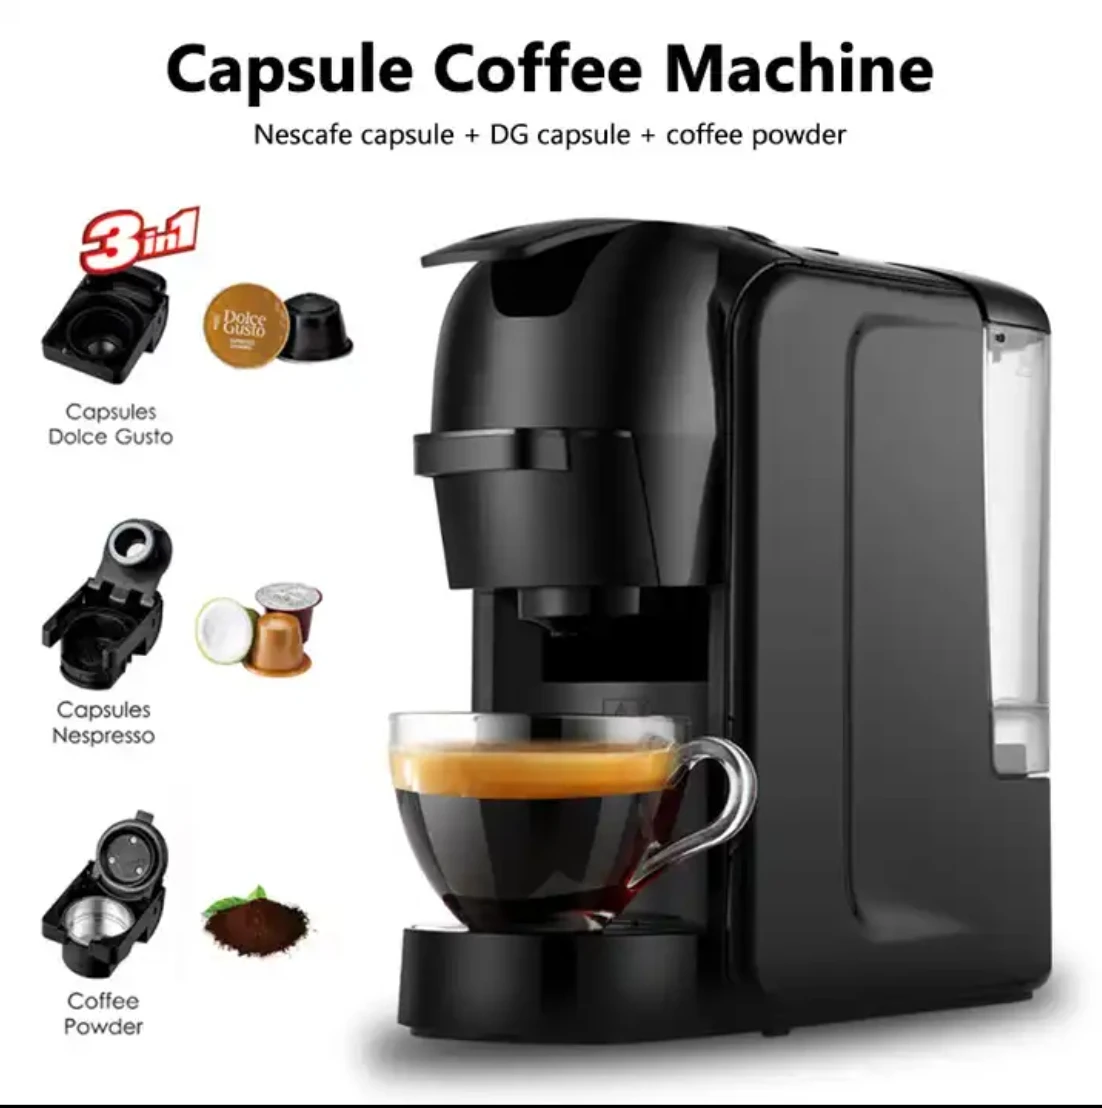 Capsule Coffee Machine 3 In1 Home Automatic Capsule Coffee Maker 220V Cappuccino Coffee Ground Coffee Cafeteria 19Bar nespresso capsule household coffee machine inissia italian home automatic coffee maker portable 19bar c40 red 220 230 240v